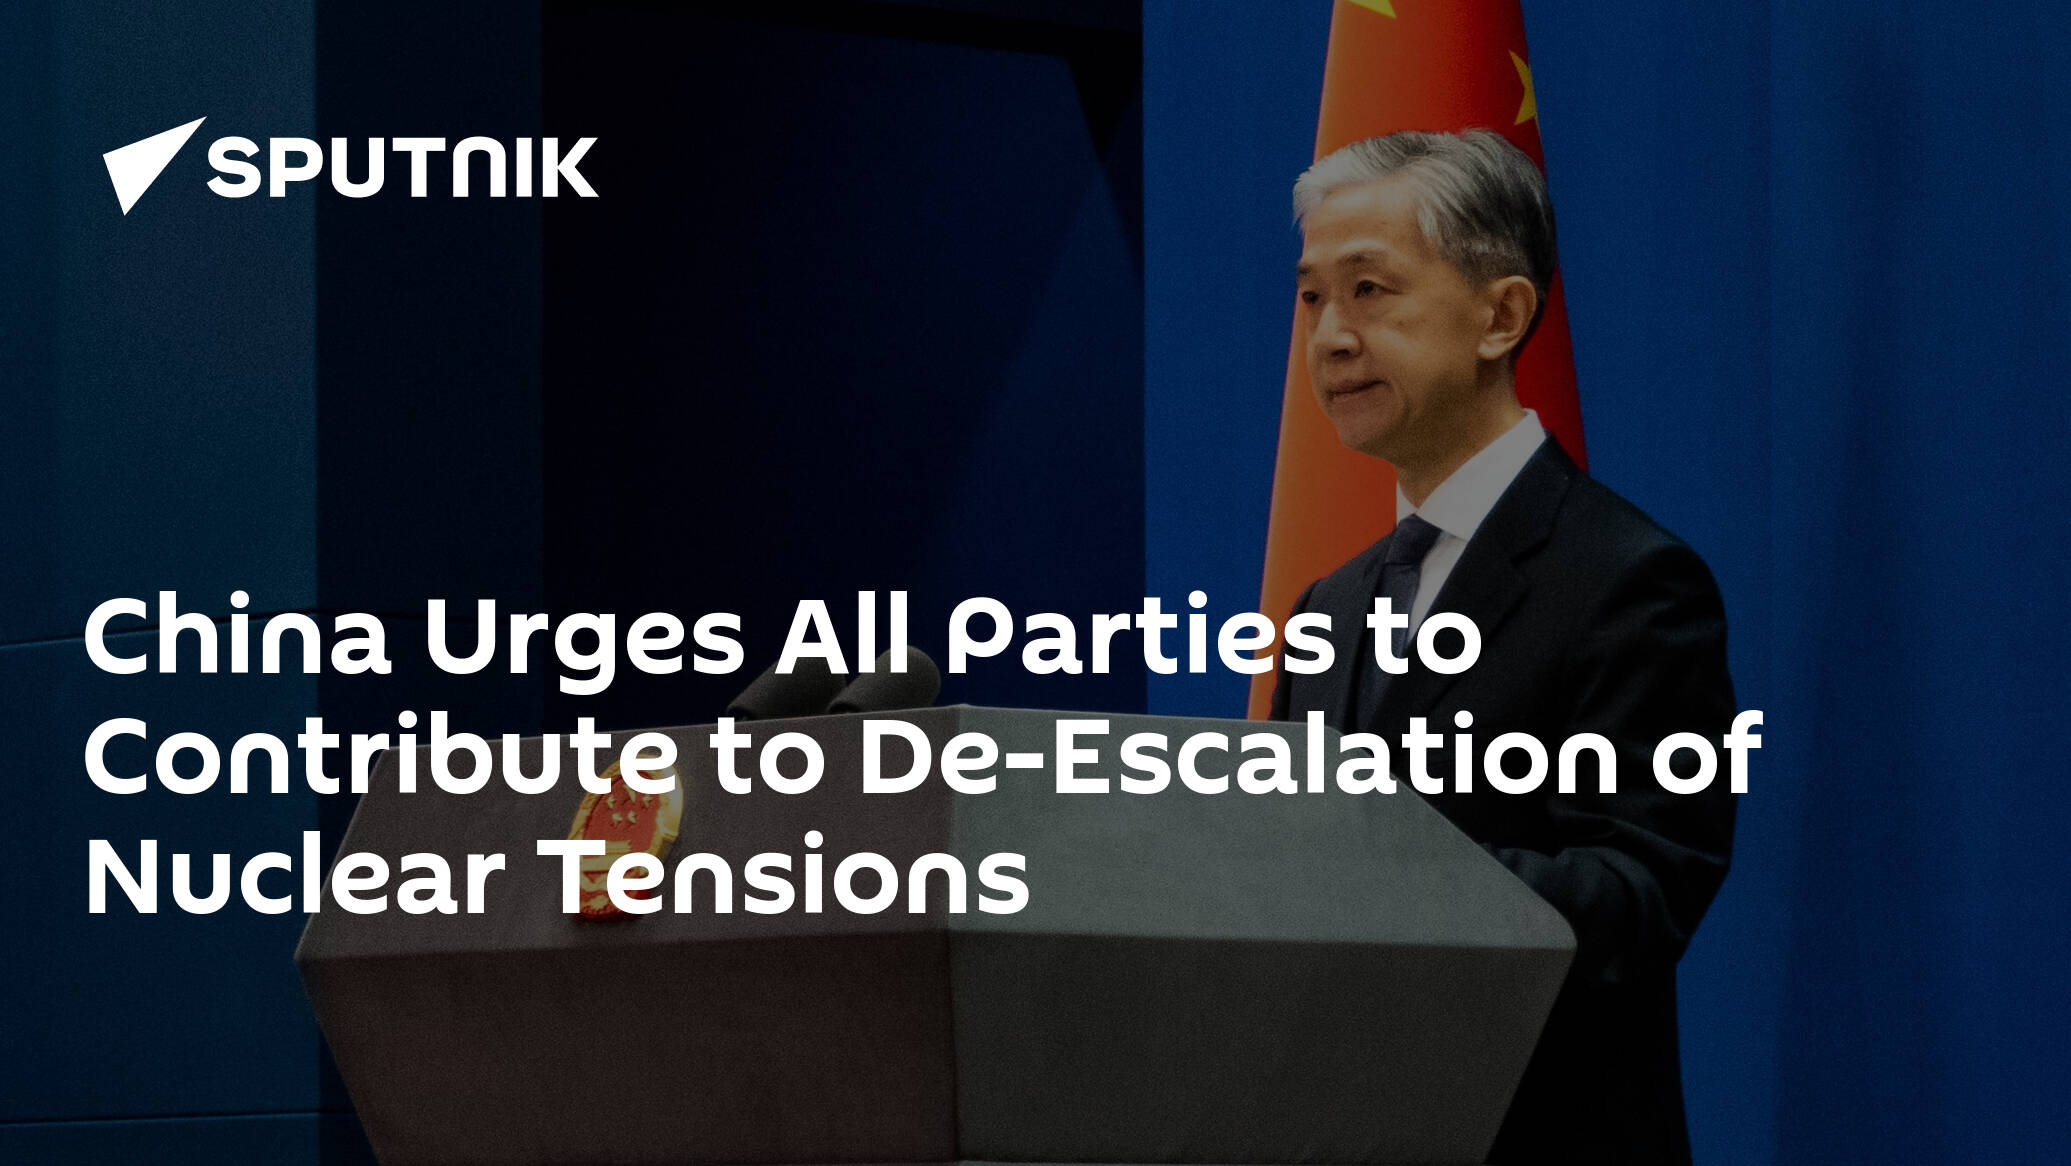 China Urges All Parties to Contribute to De-Escalation of Nuclear Tensions